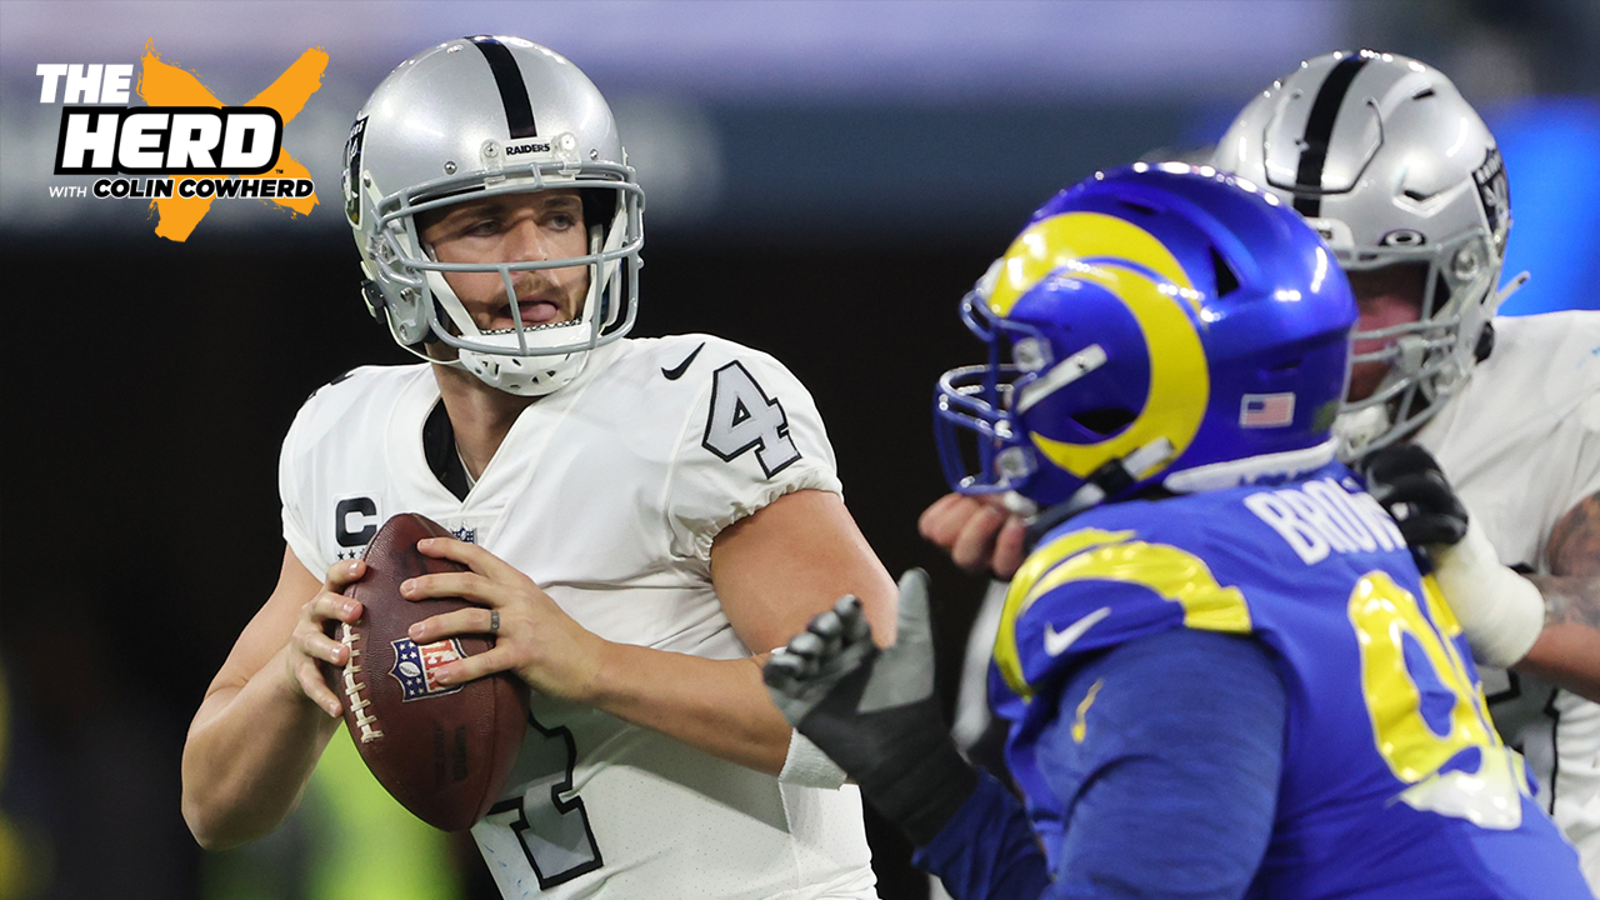 Raiders take on Baker Mayfield and Rams in 4th quarter stunner